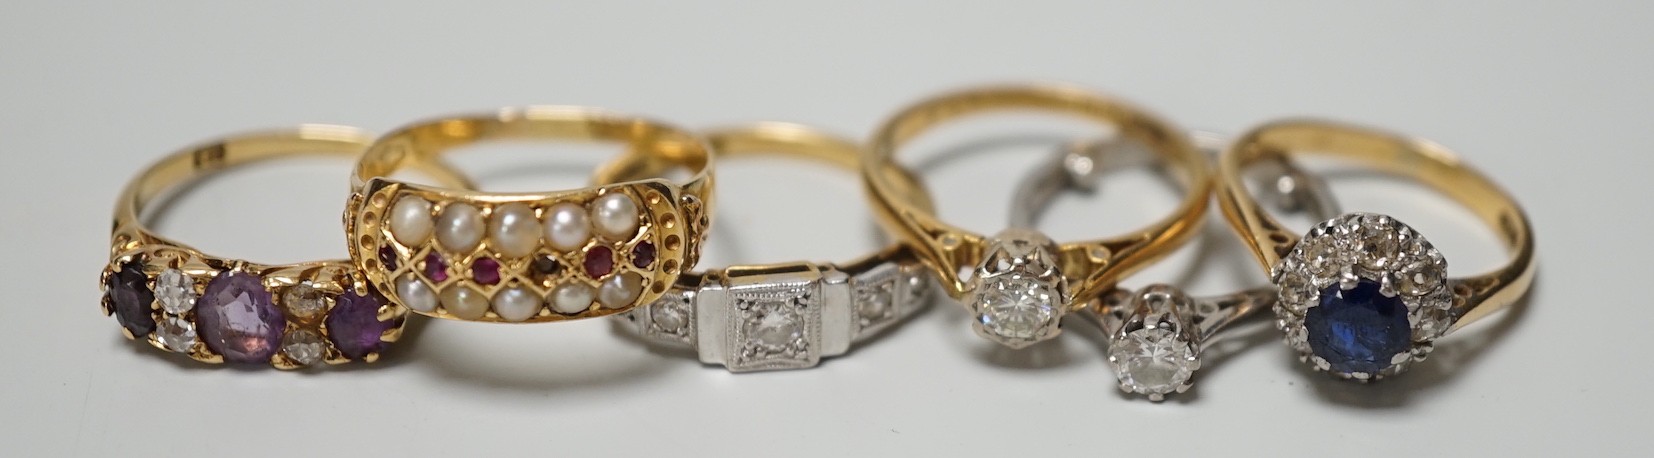 Five assorted 18ct and gem set rings, including 1920's millegrain diamond set, two solitaire diamond rings, sapphire and diamond cluster and amethyst and diamond half hoop (stone replaced and repair) and one other yellow